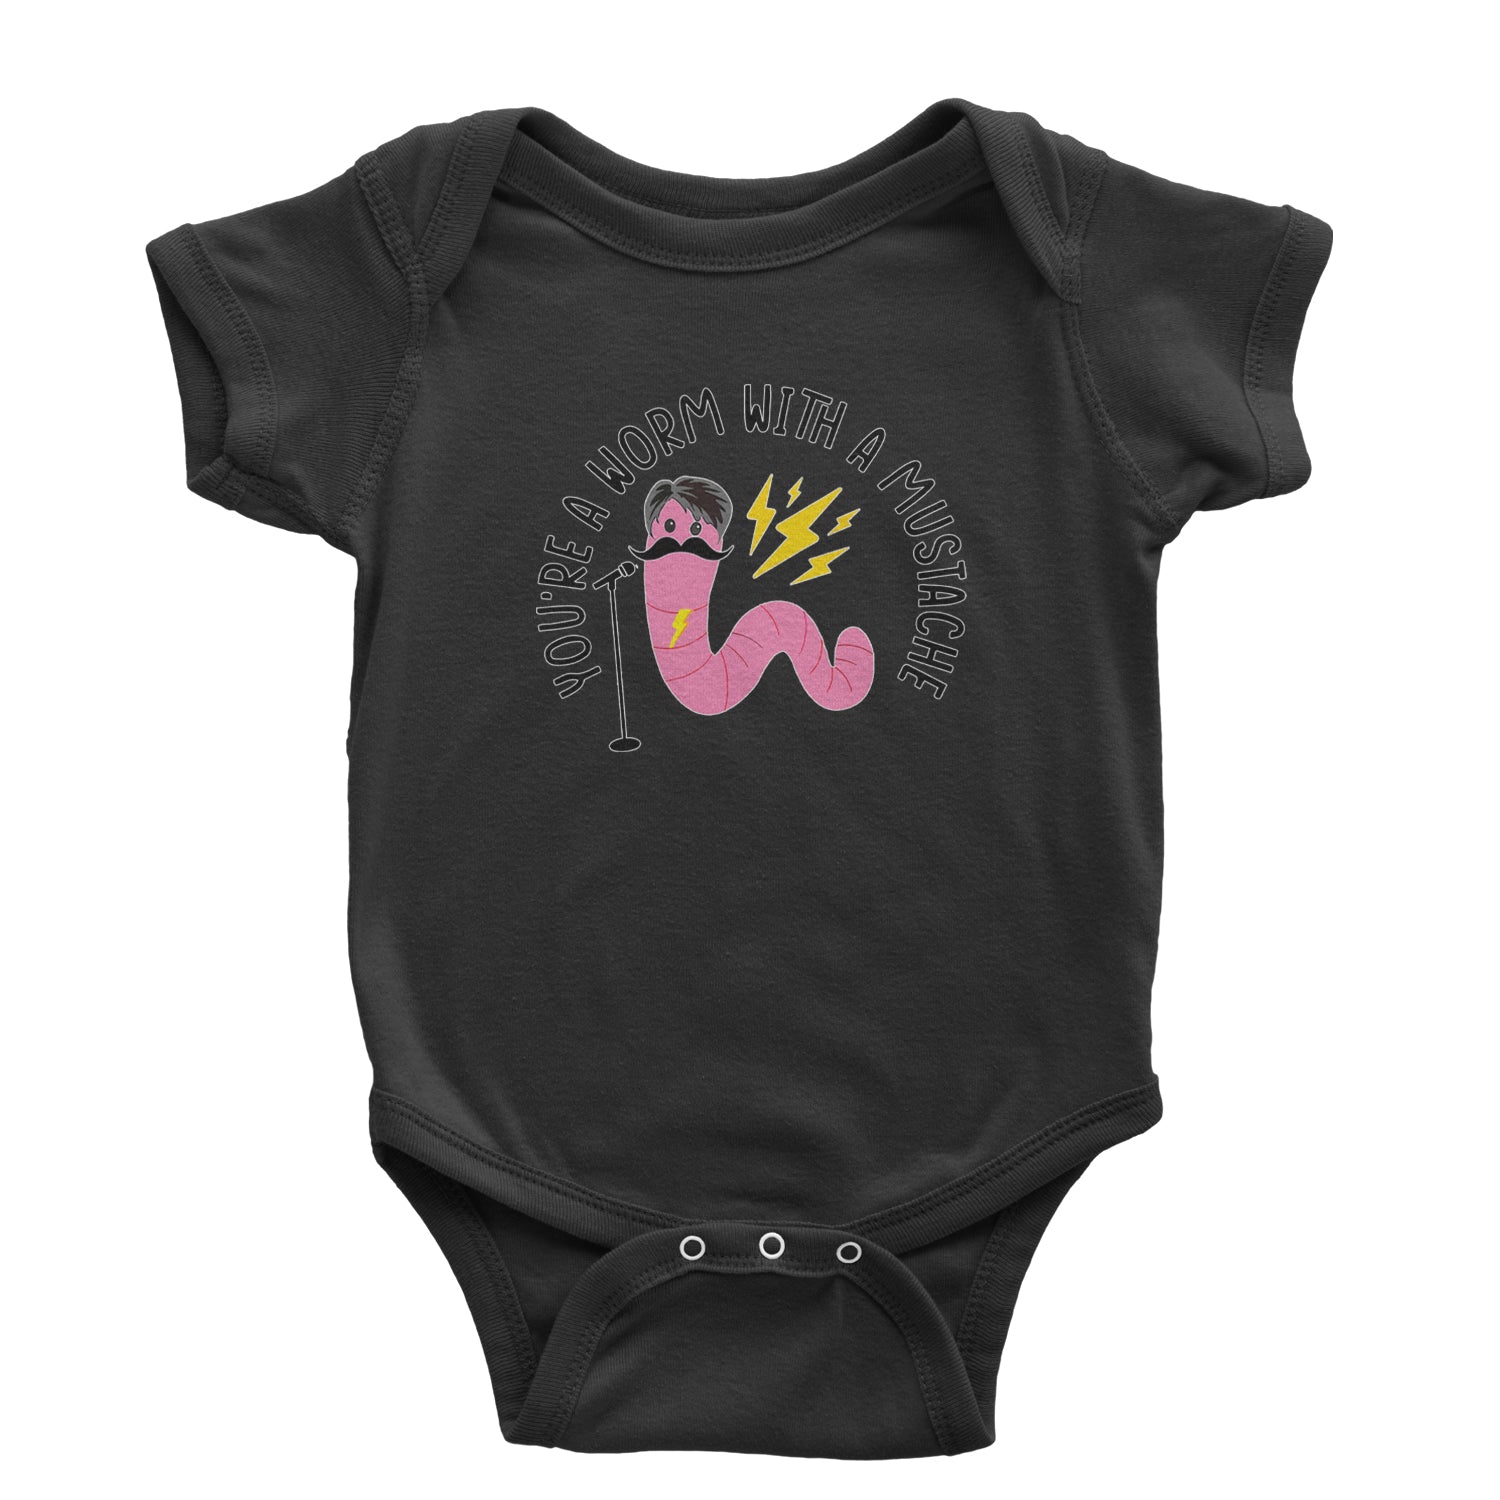 You're A Worm With A Mustache Tom Scandoval Infant One-Piece Romper Bodysuit and Toddler T-shirt